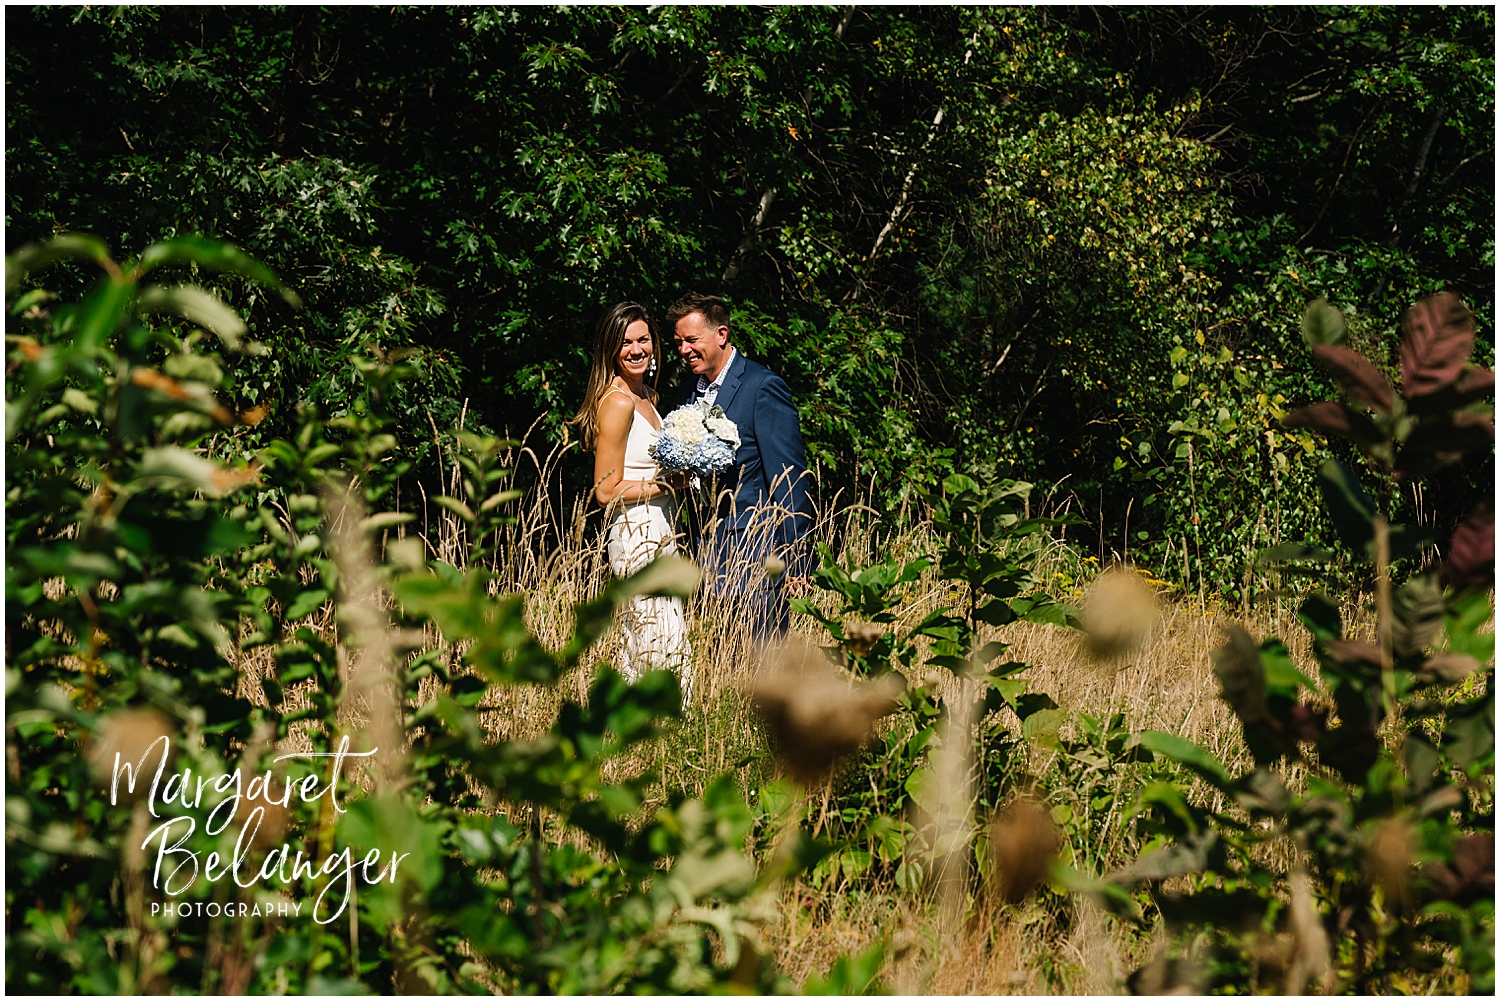 Couple in wedding attire sharing a funny moment amidst lush greenery.